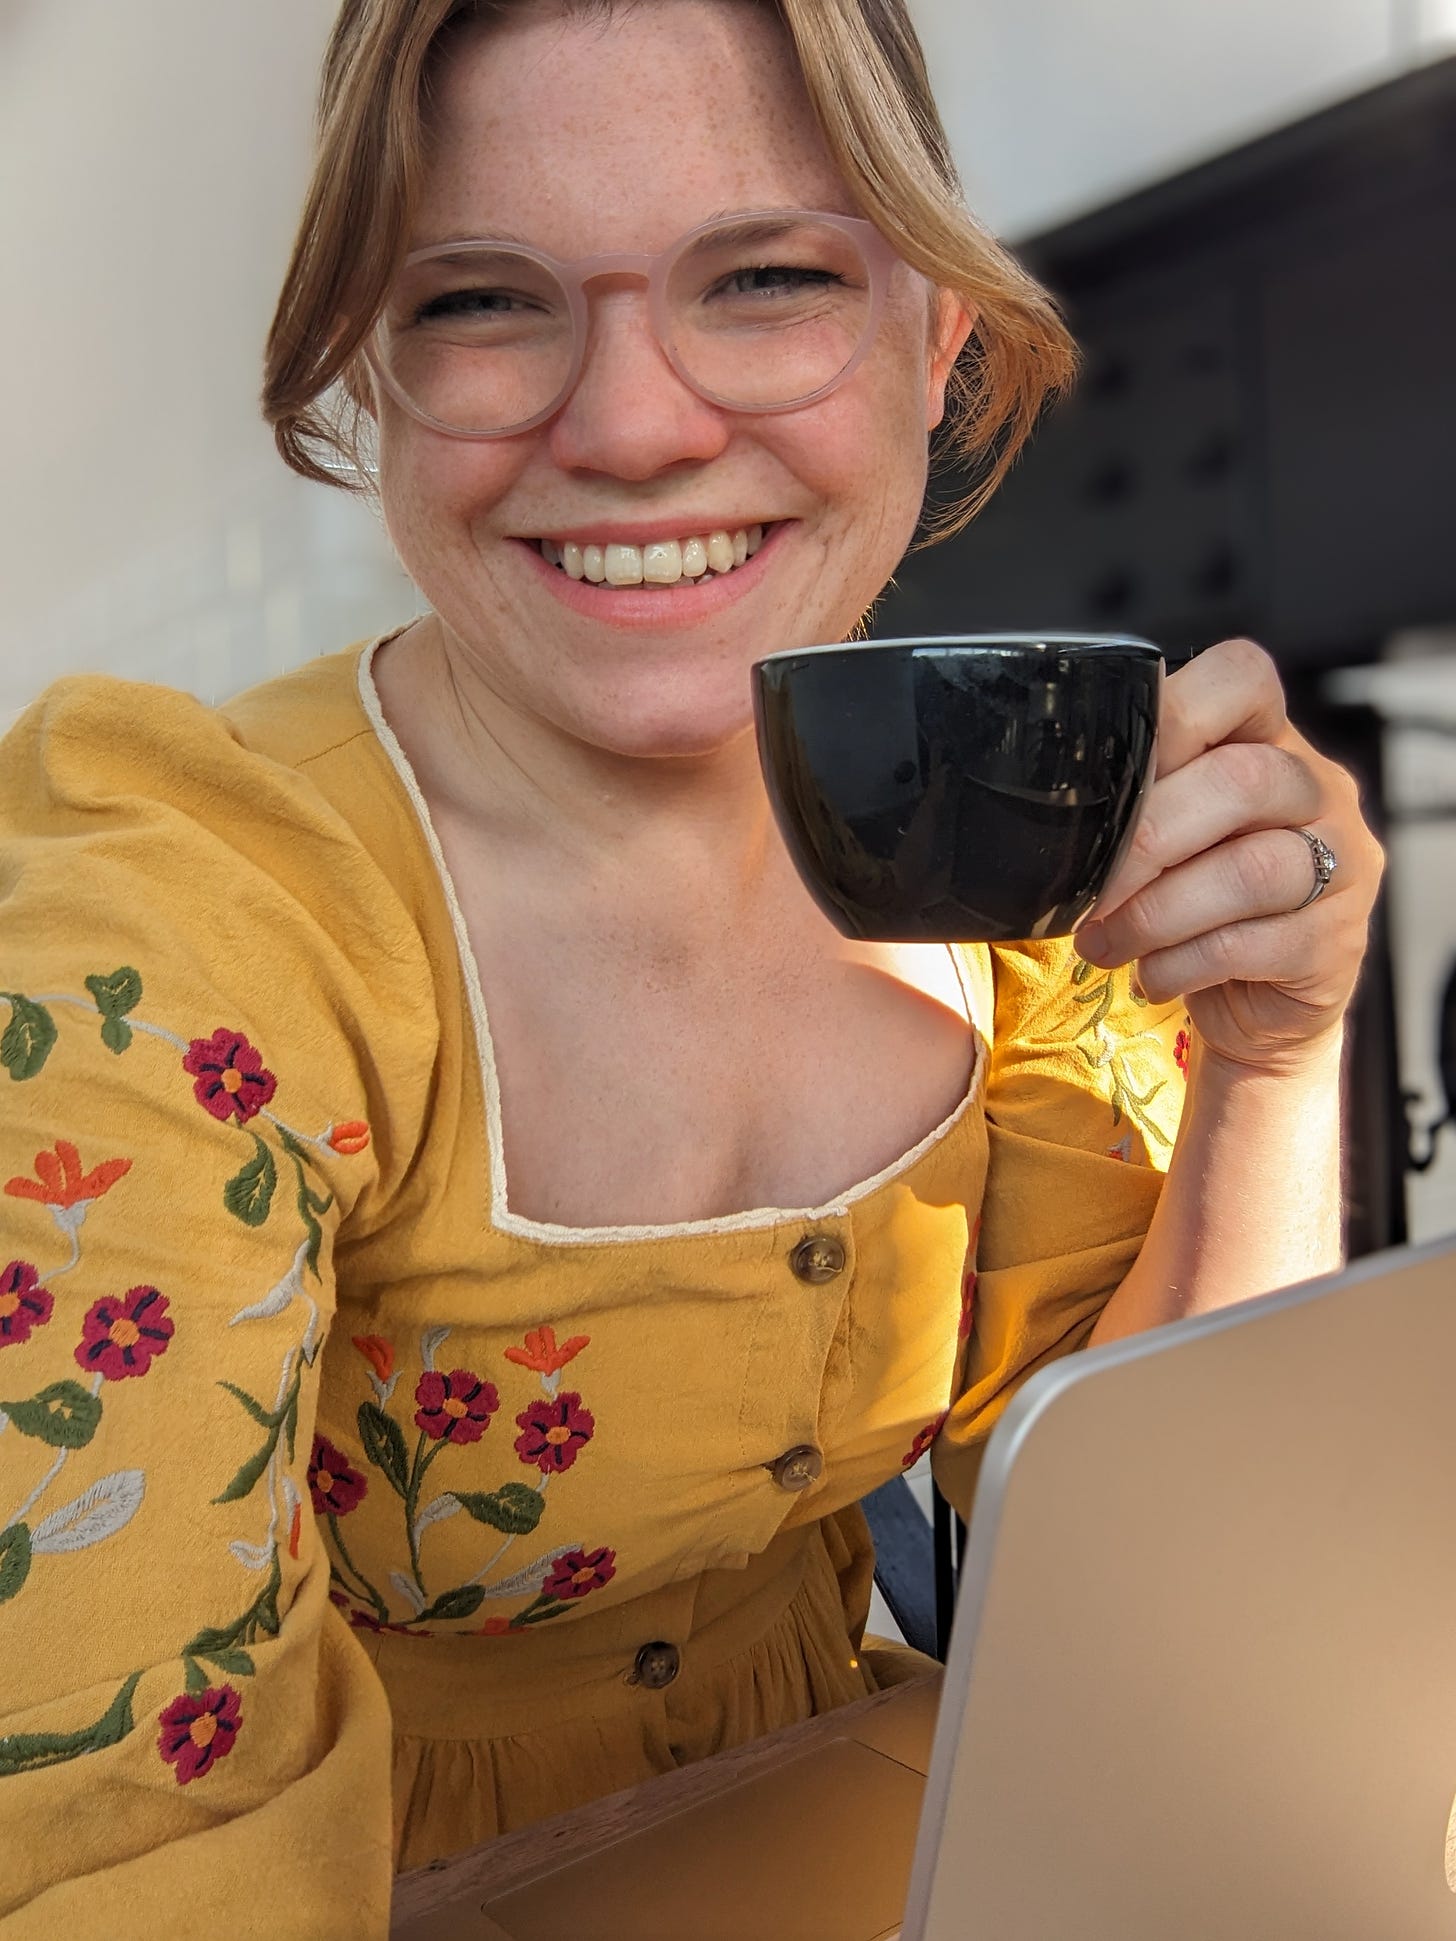 Libby Page sat at a desk with her laptop and a cup of tea, dressed in a yellow dress covered in embroidered flowers. She is smiling and wearing glasses.